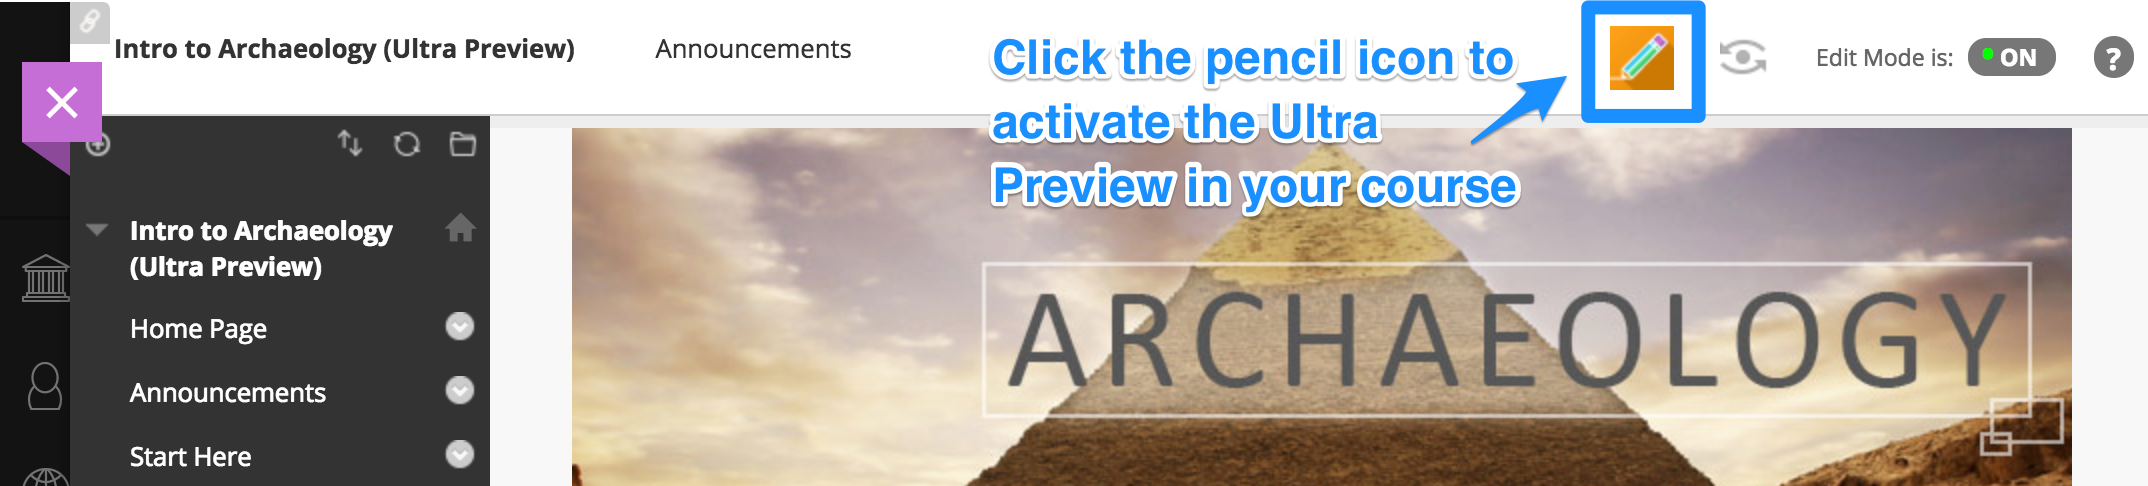 Click pencil icon to activate Ultra Preview